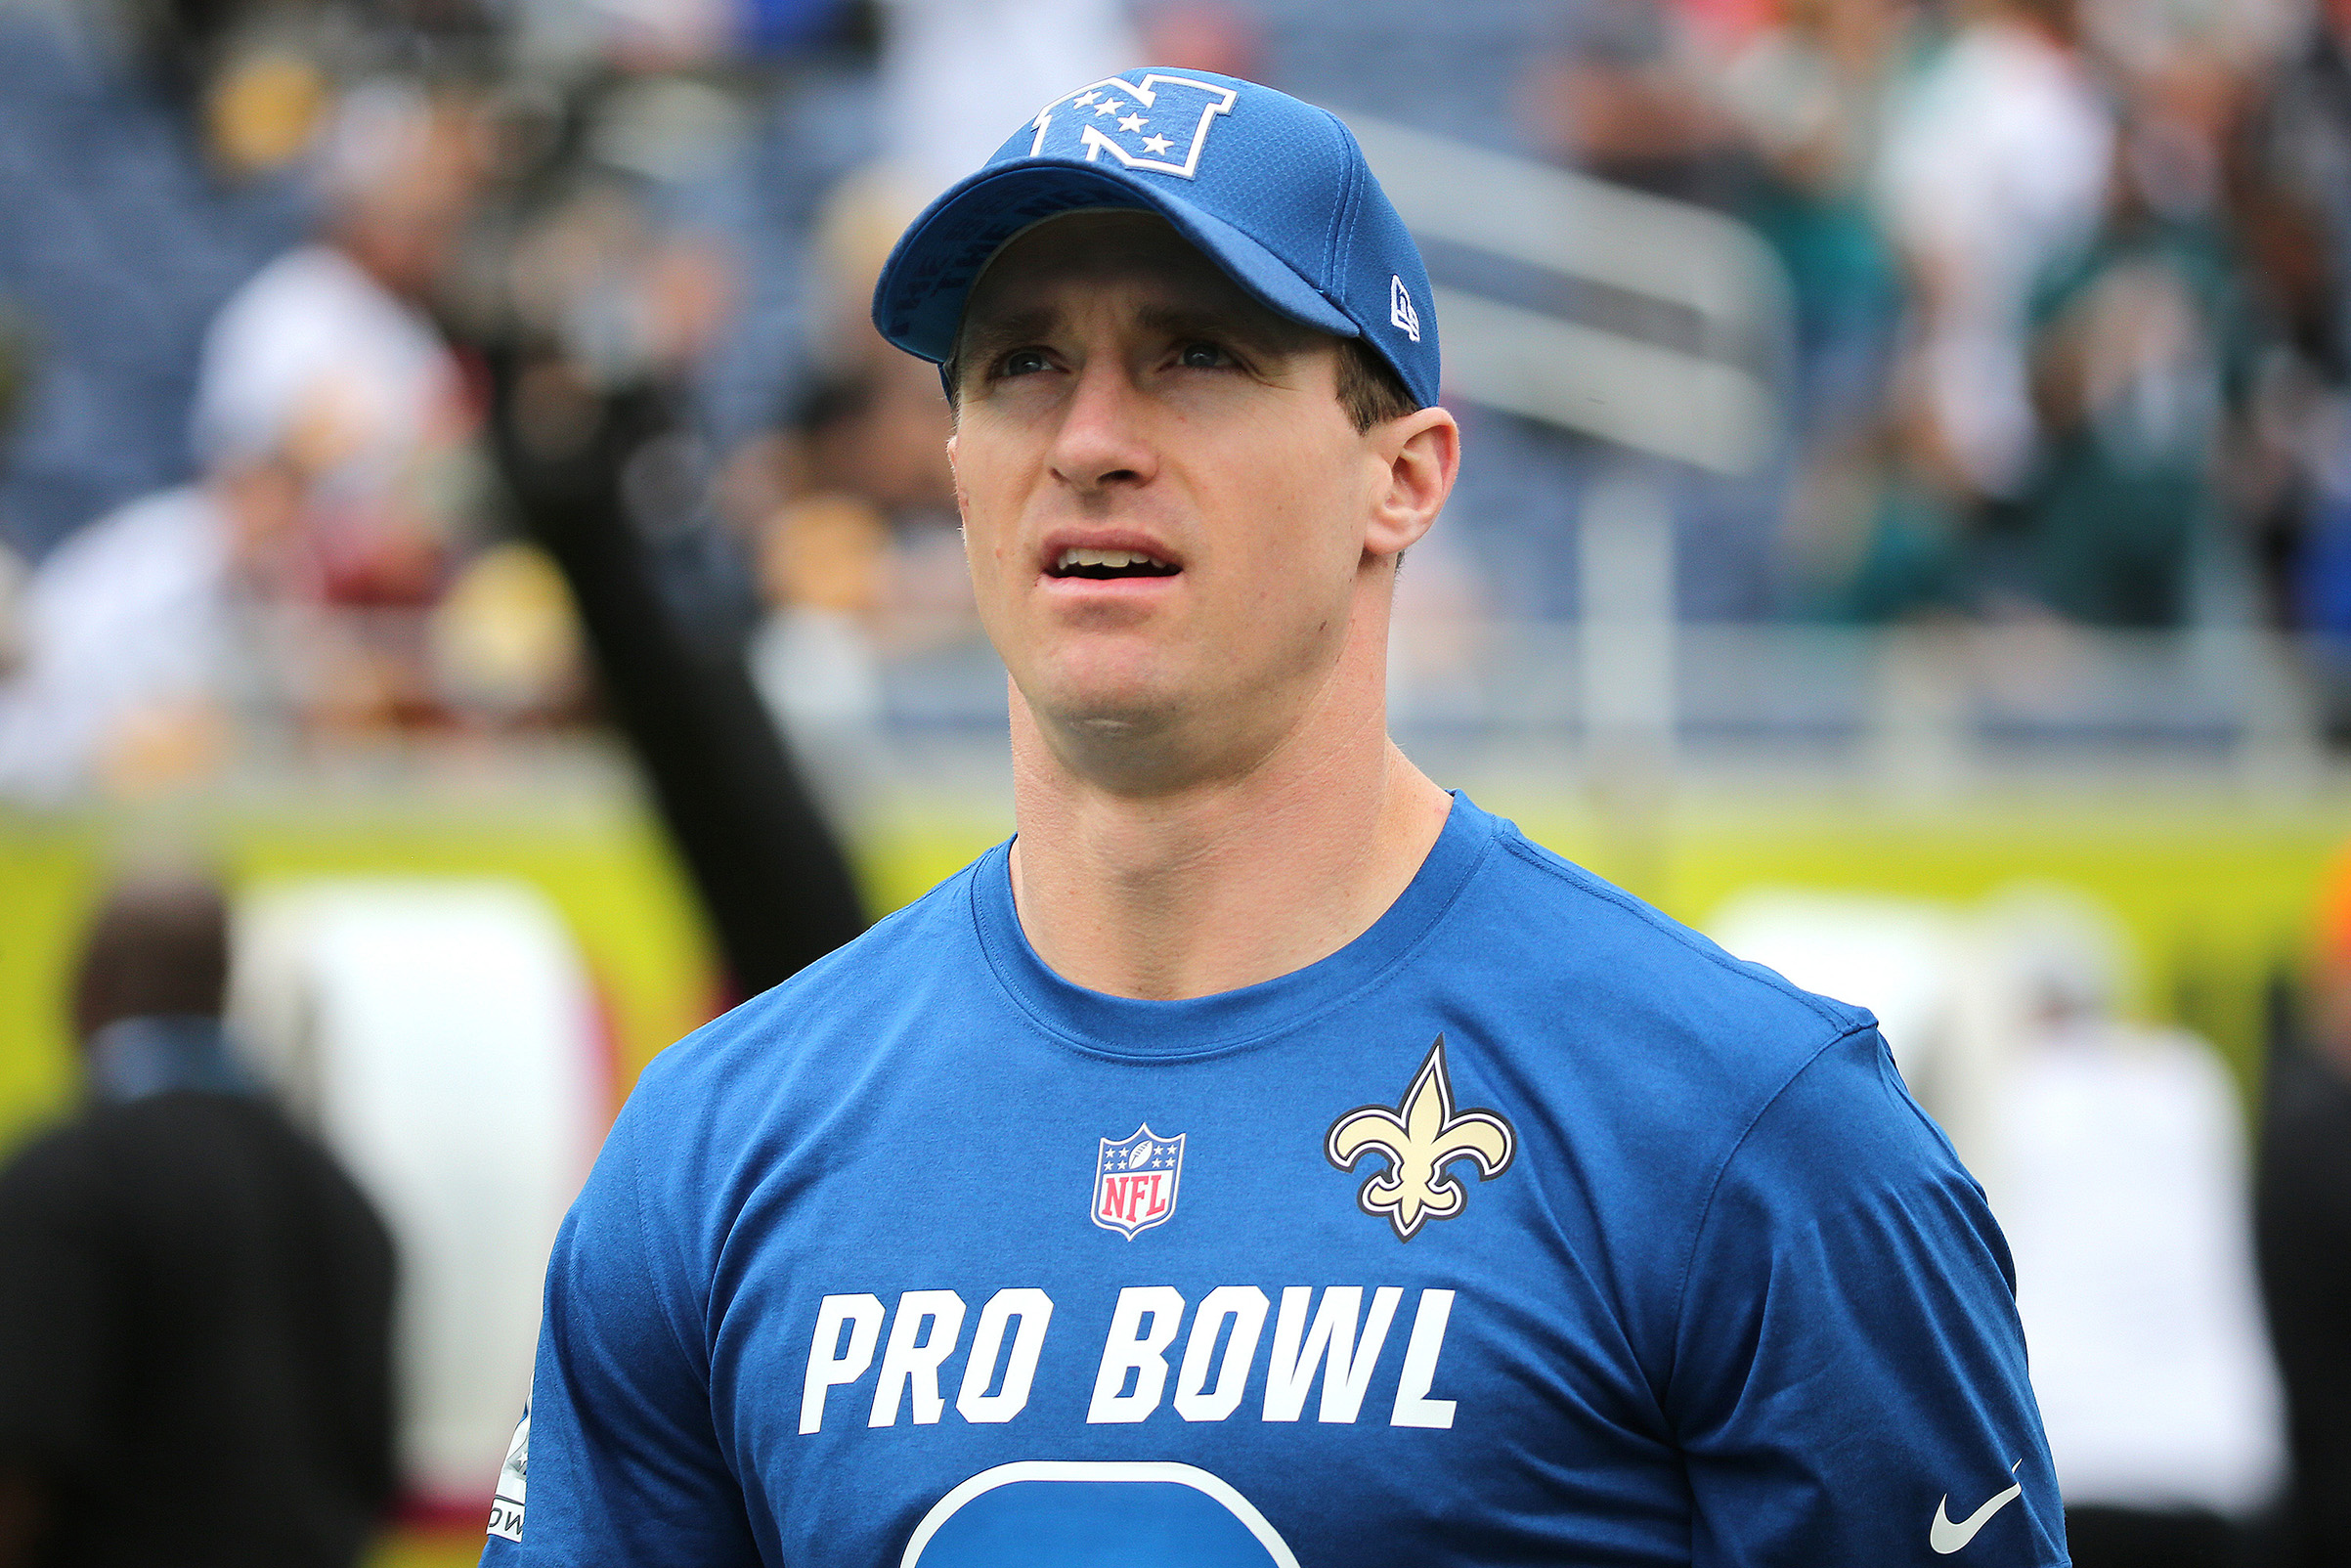 Drew Brees #9 of the New Orleans Saints warms up during the NFL Pro Bowl between the AFC and NFC at Camping World Stadium on Jan. 28, 2018. (Alex Menendez—Getty Images)